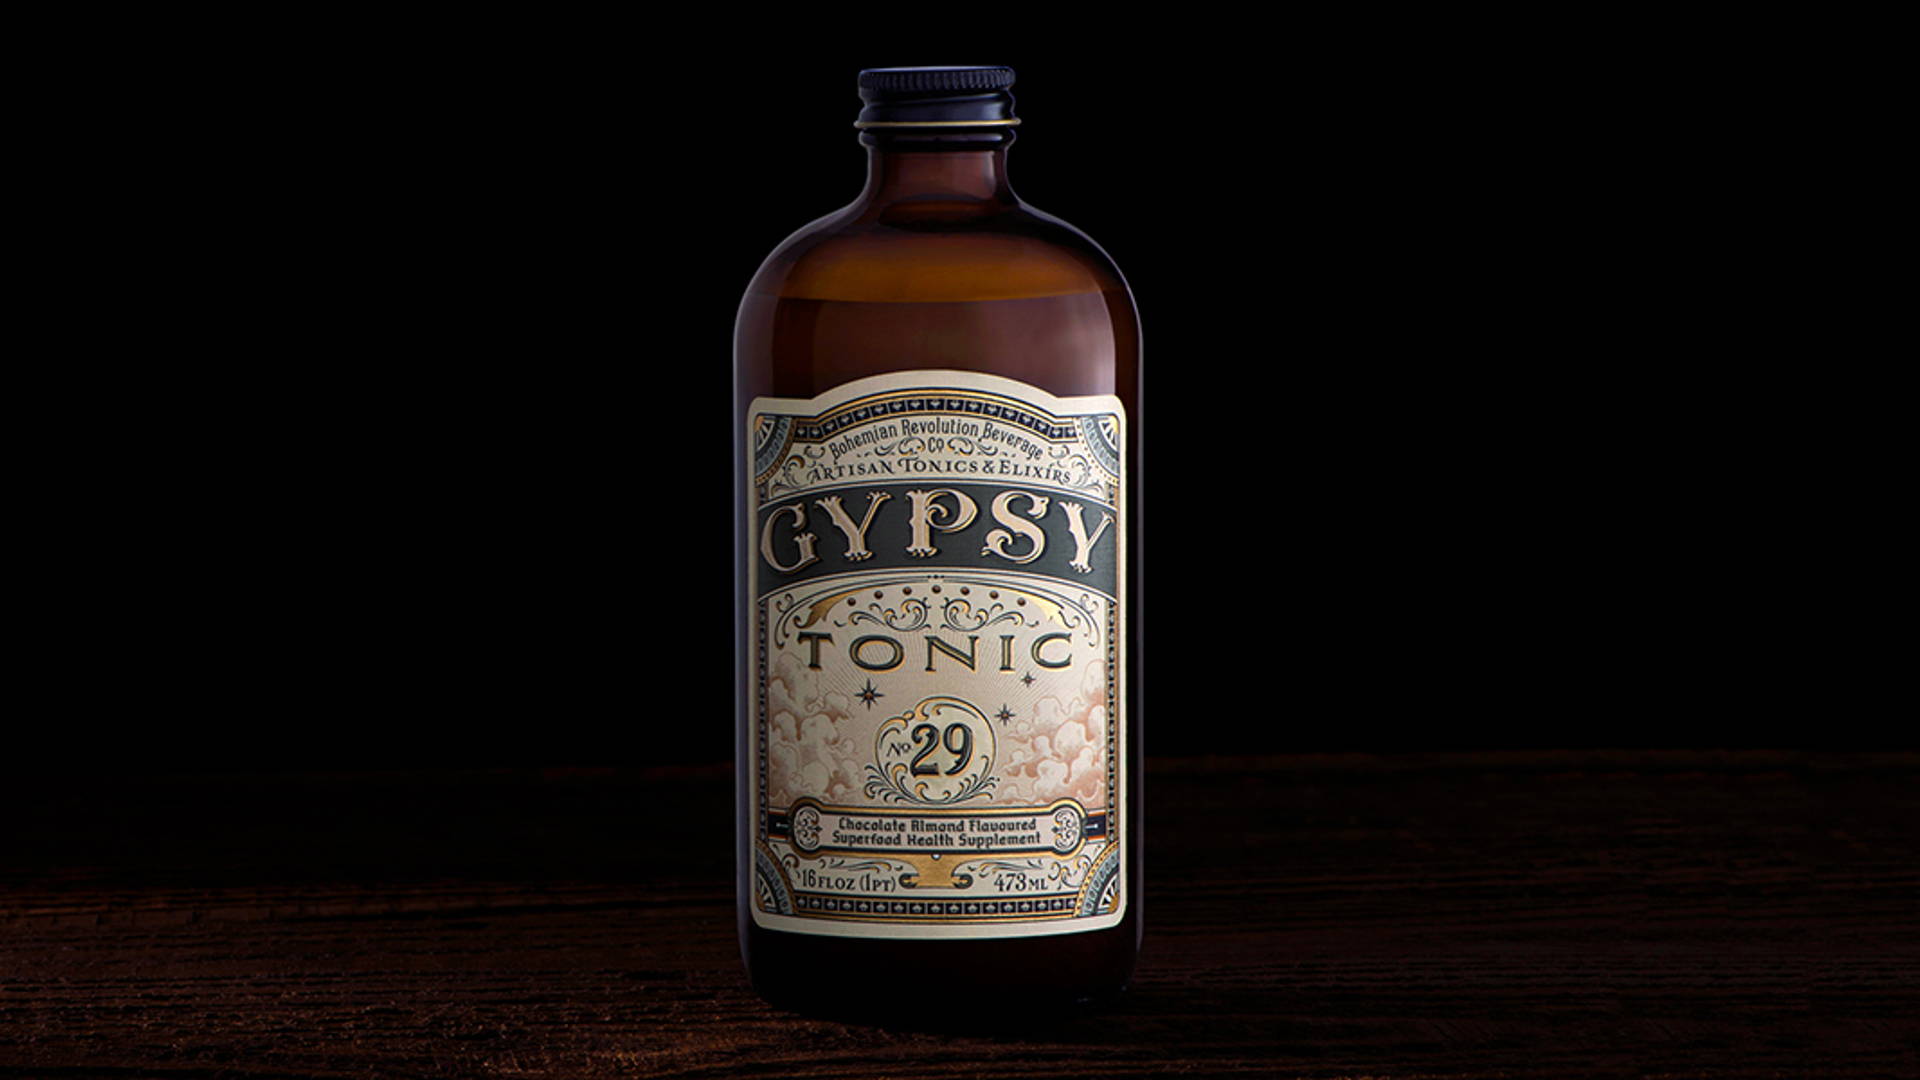 Featured image for Capturing the 1800s Apothecary Scene in Gypsy Tonic’s Intricate Packaging